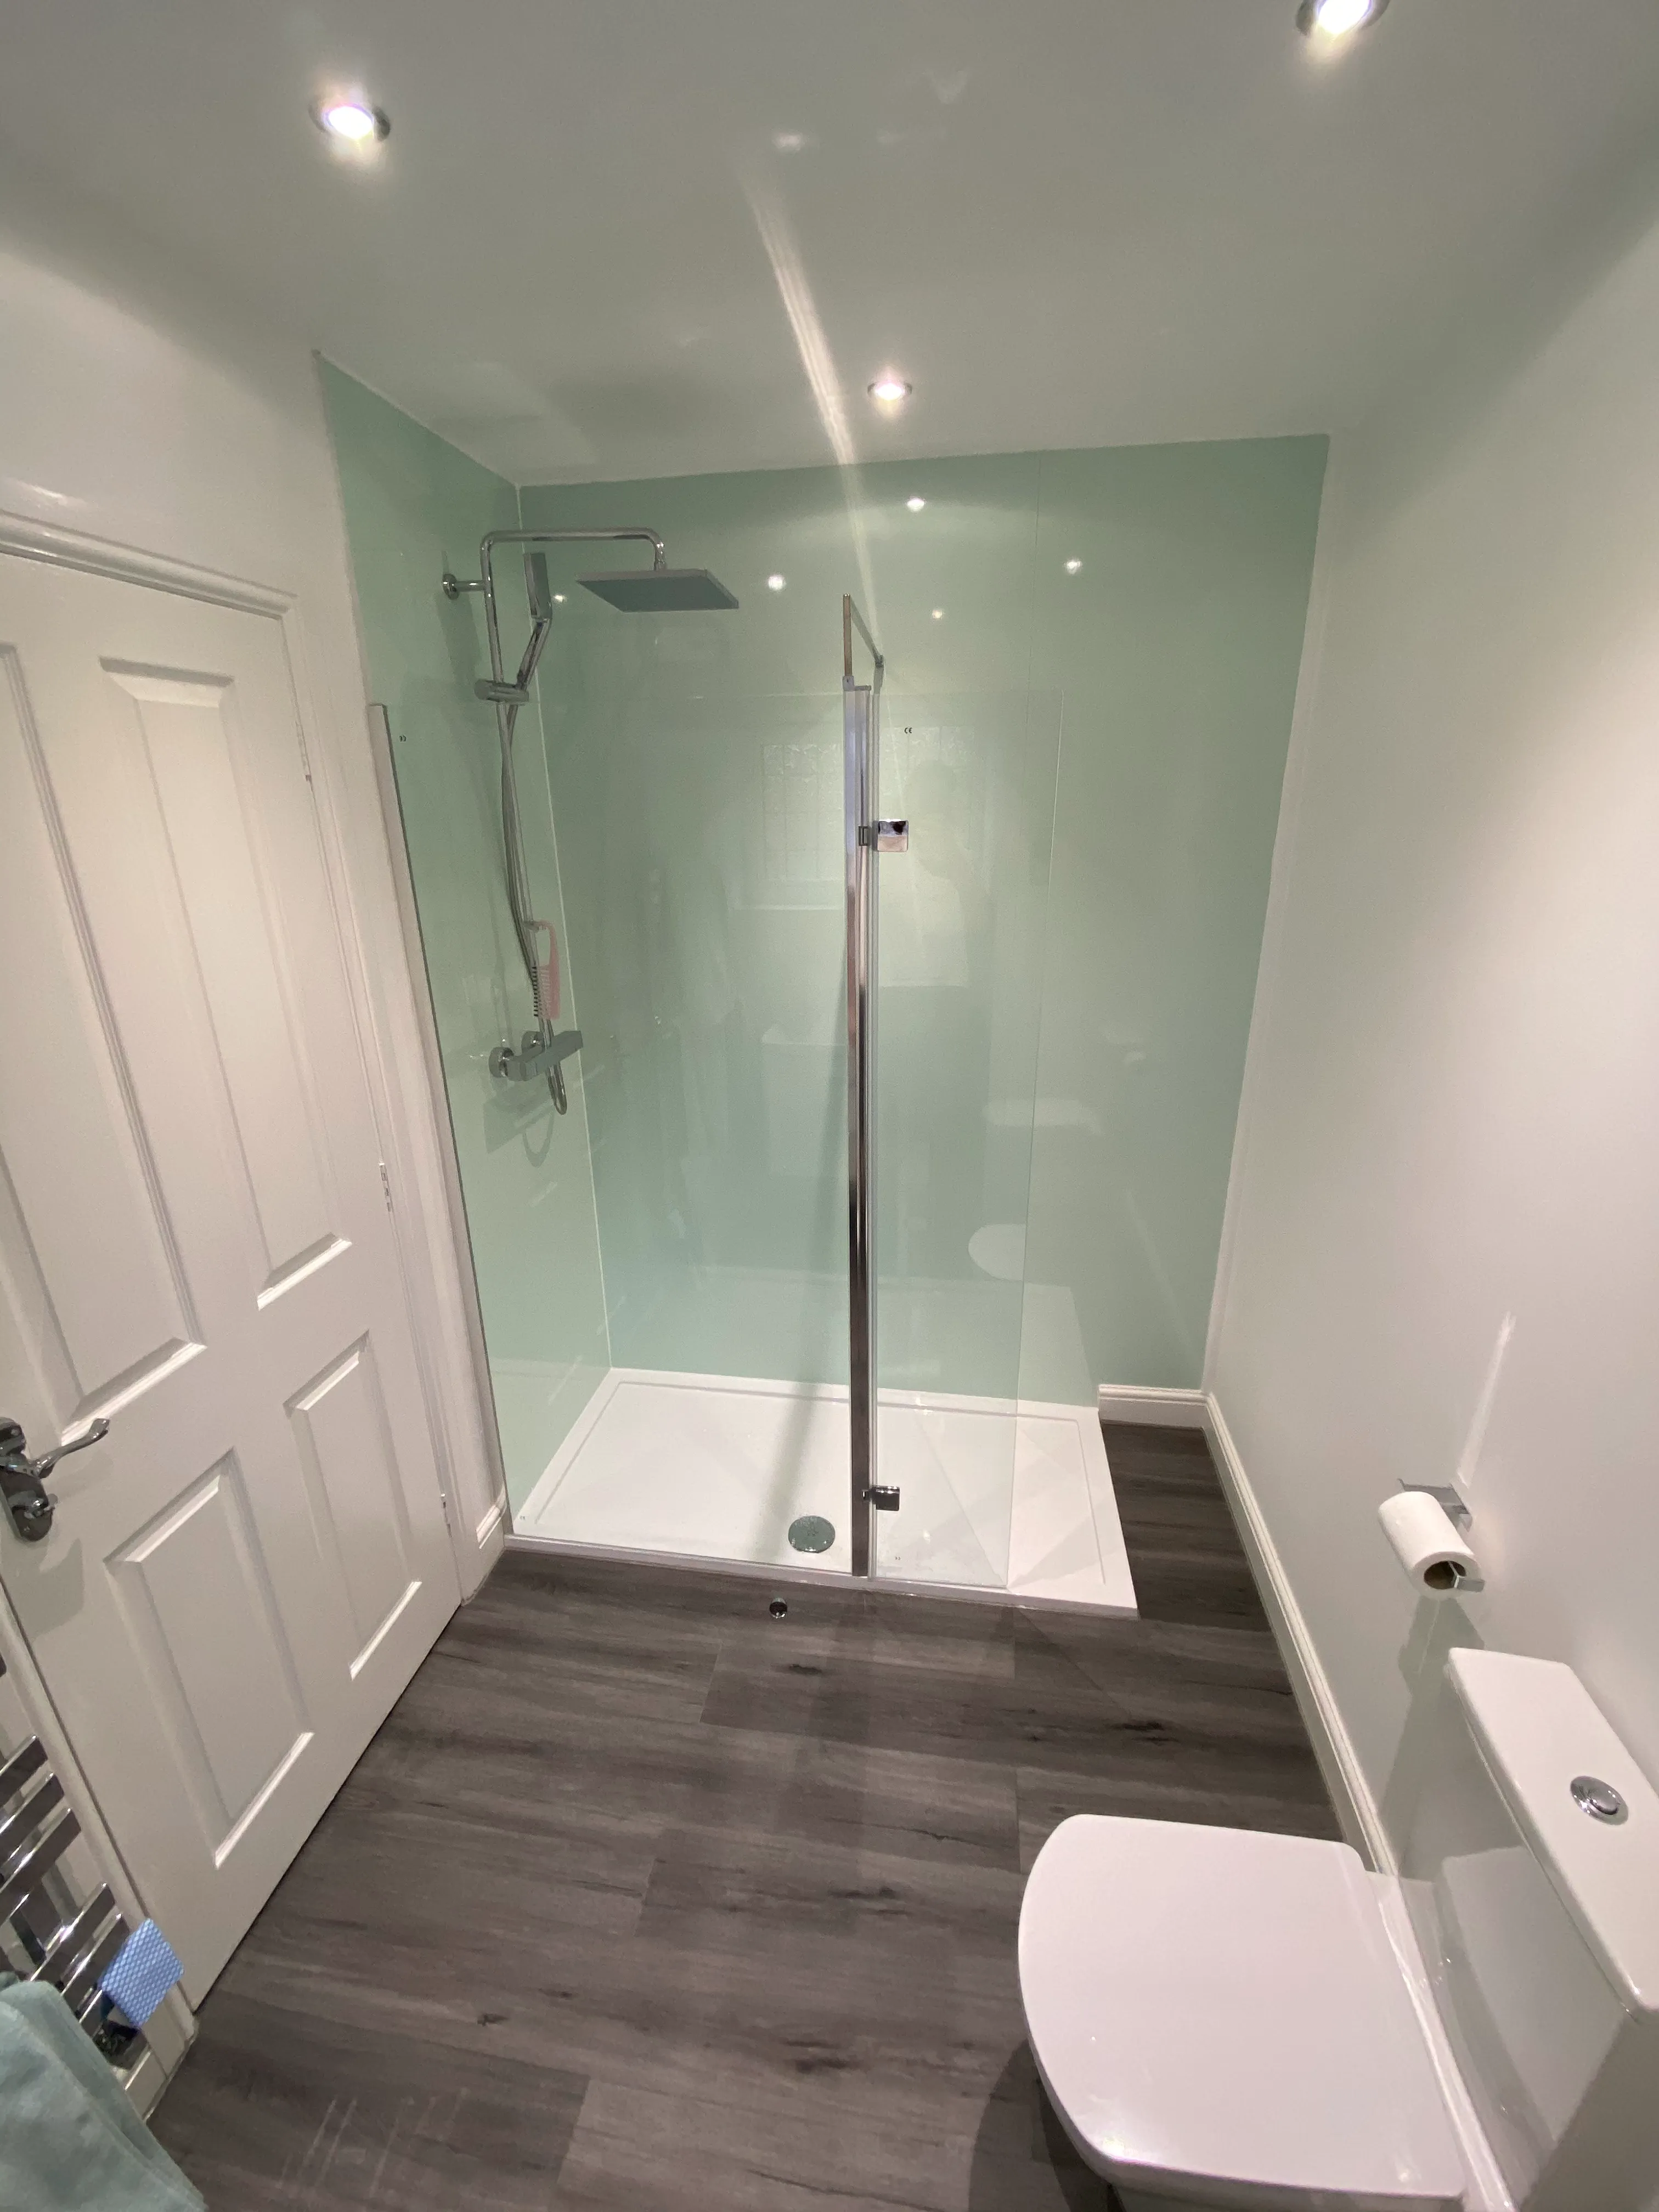 standing shower in a bathroom